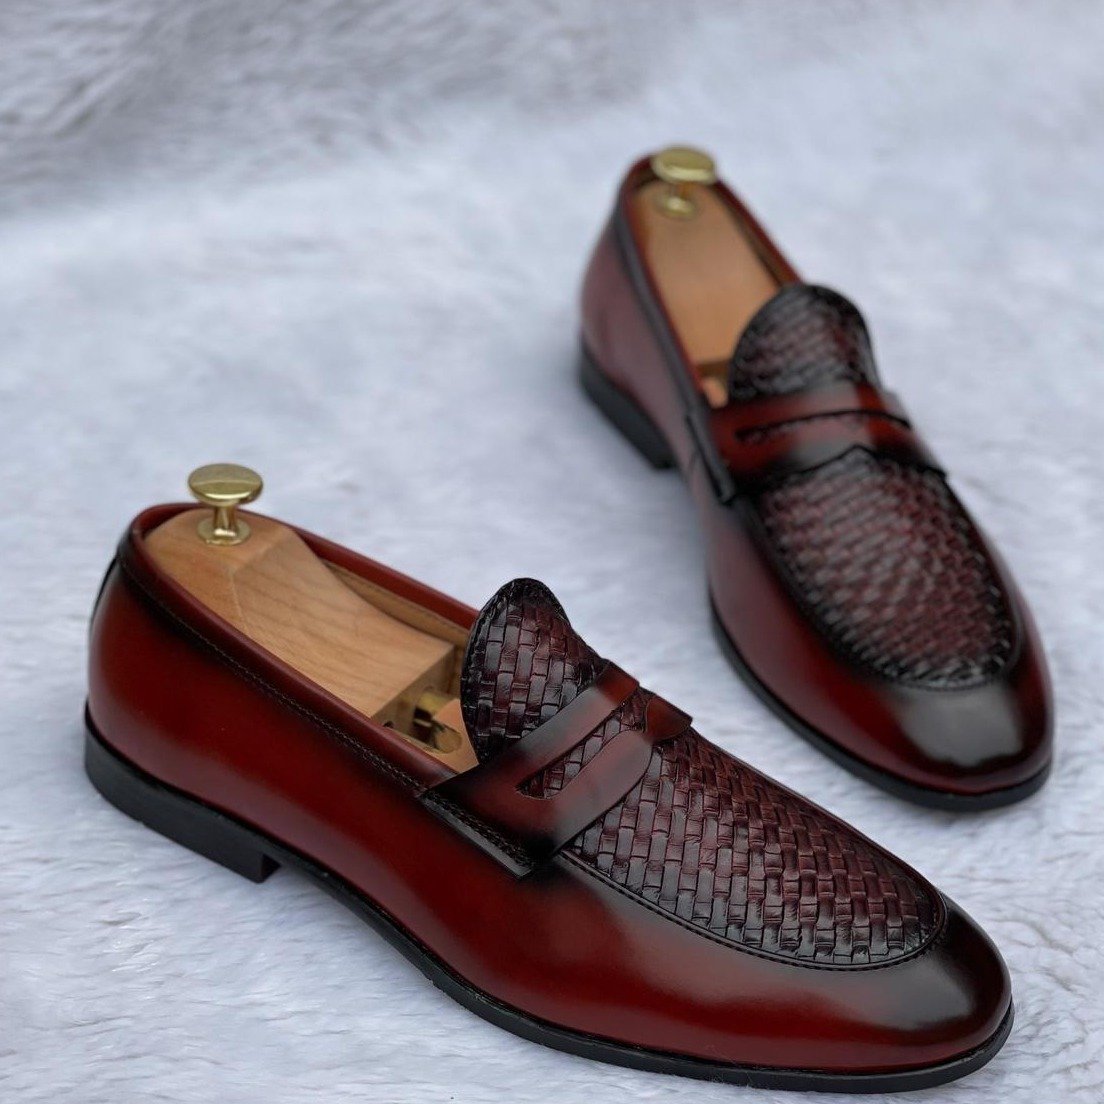 New Woven Moccasin Loafer For Office Wear And Casual Wear-JonasParamou ...